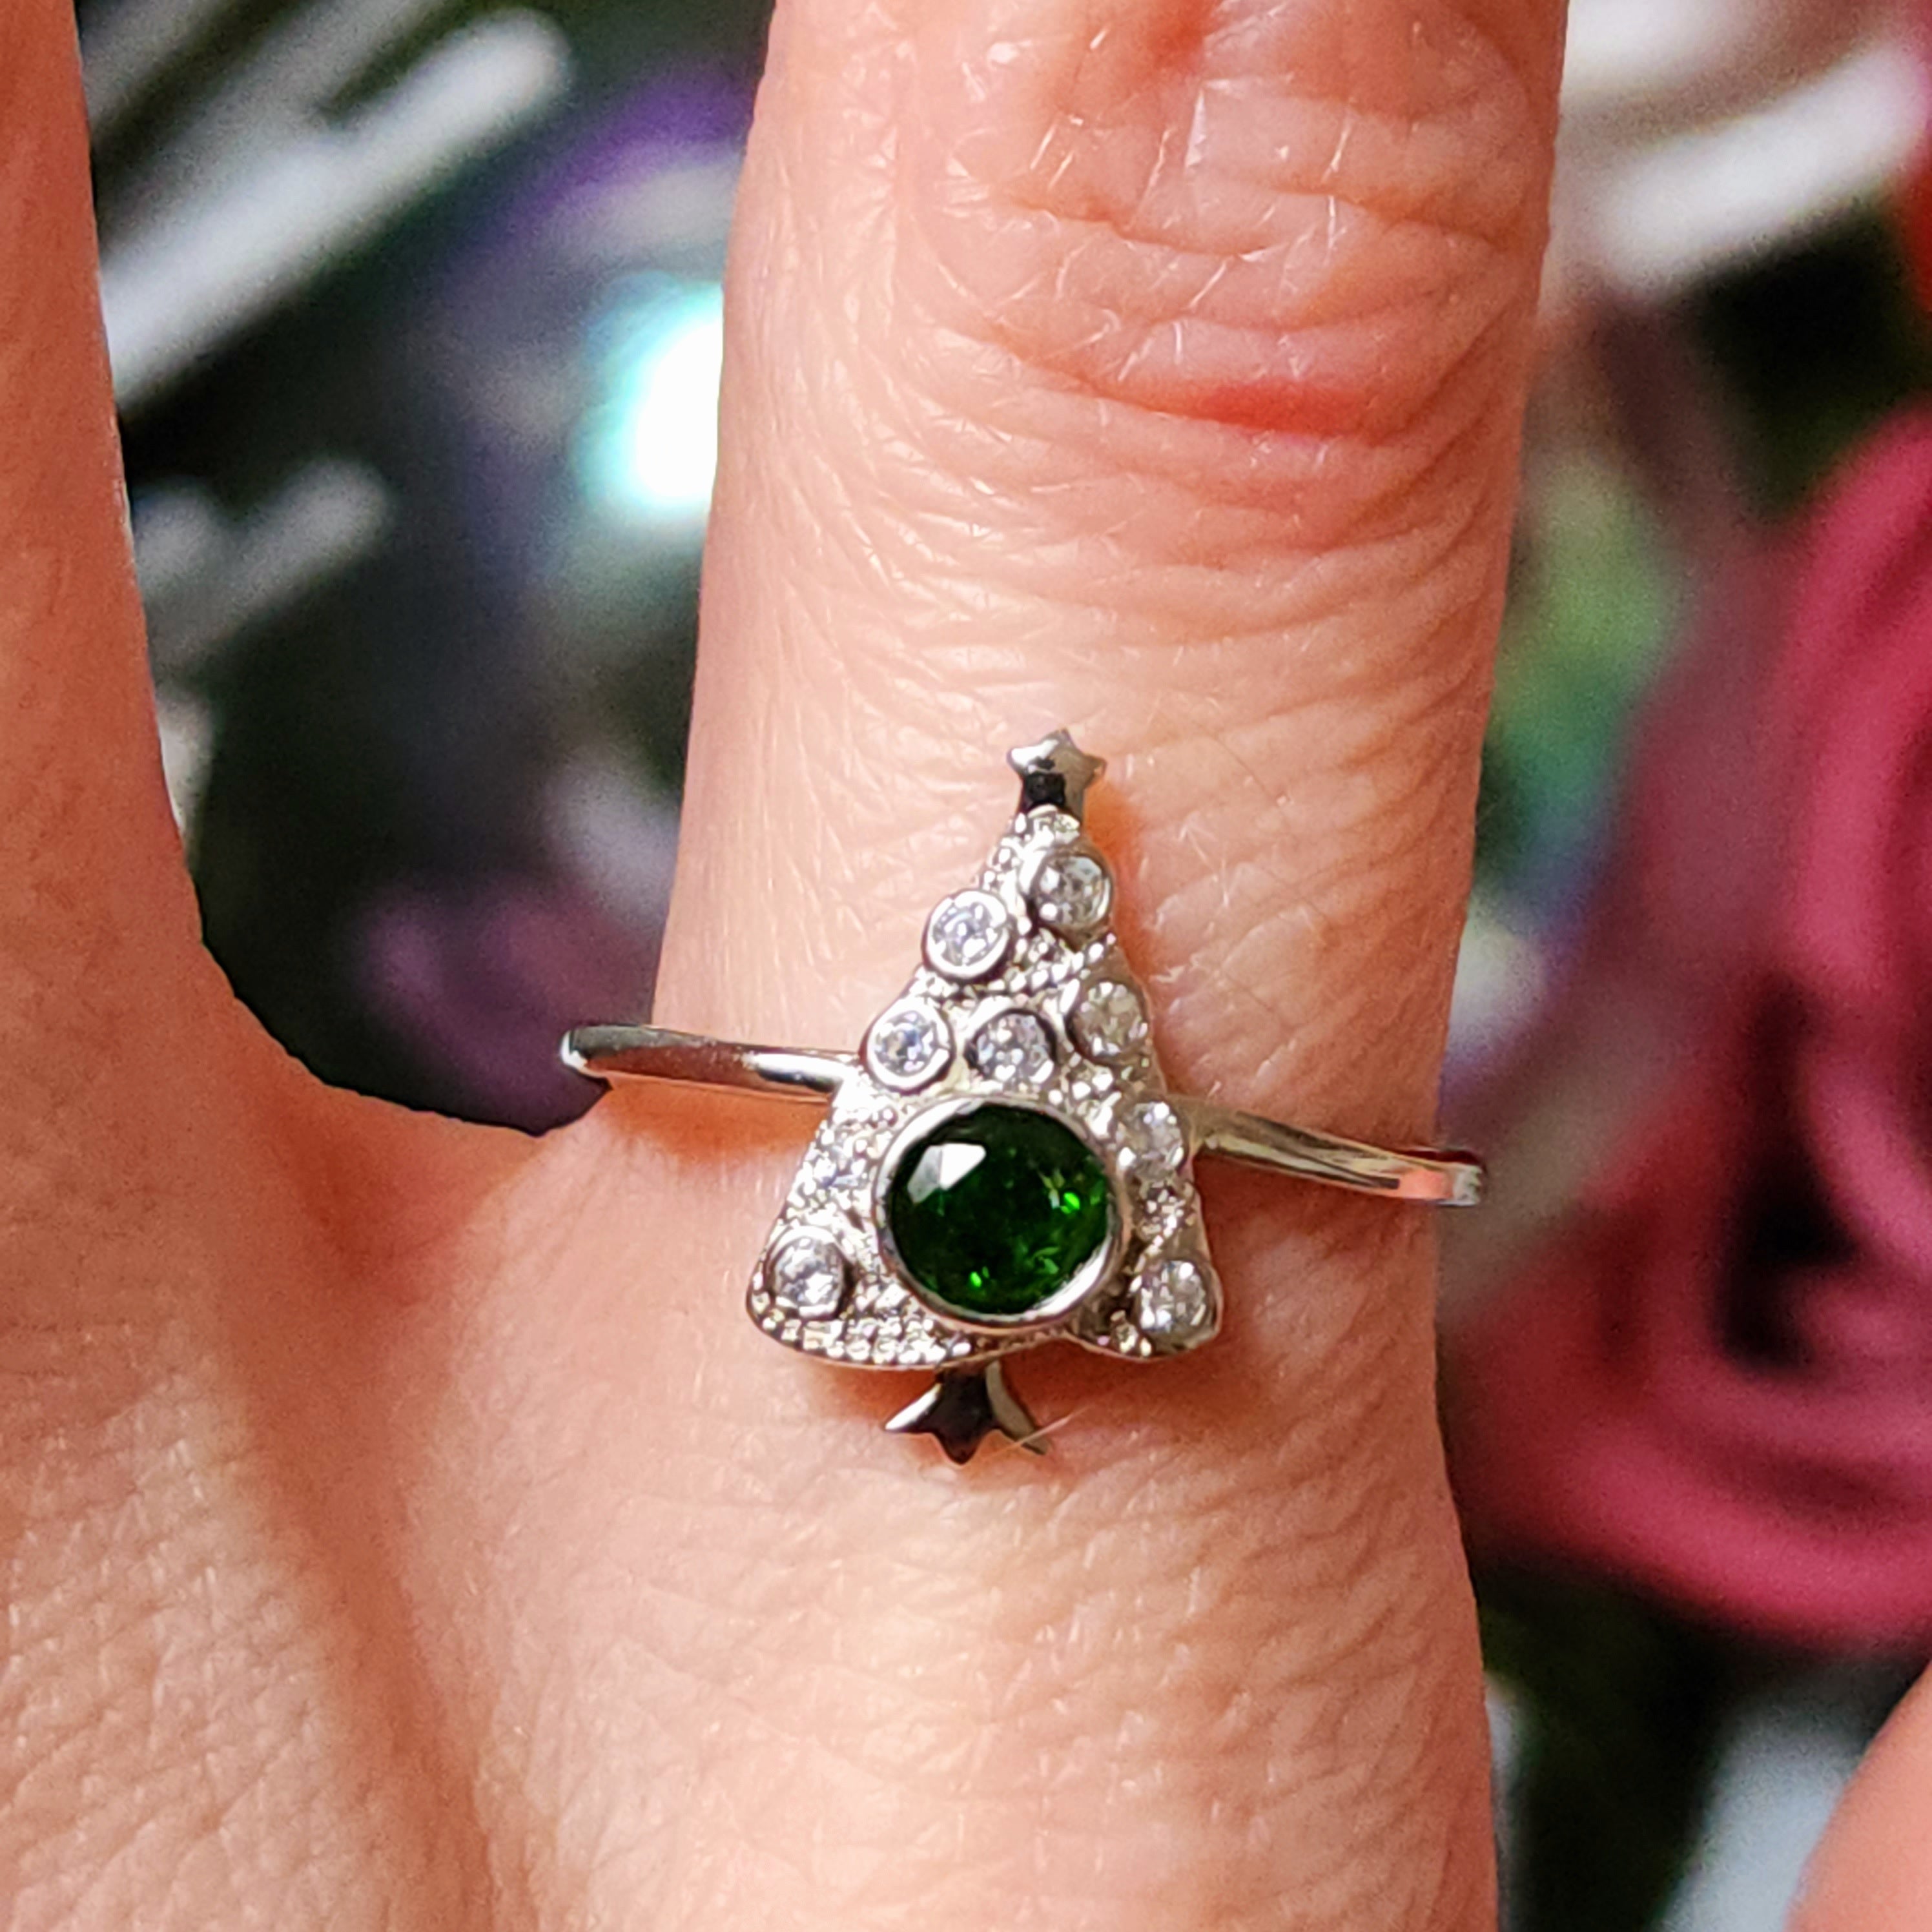 Chrome Diopside Tree Adjustable Ring .925 Silver for Emotional Healing and Forgiveness